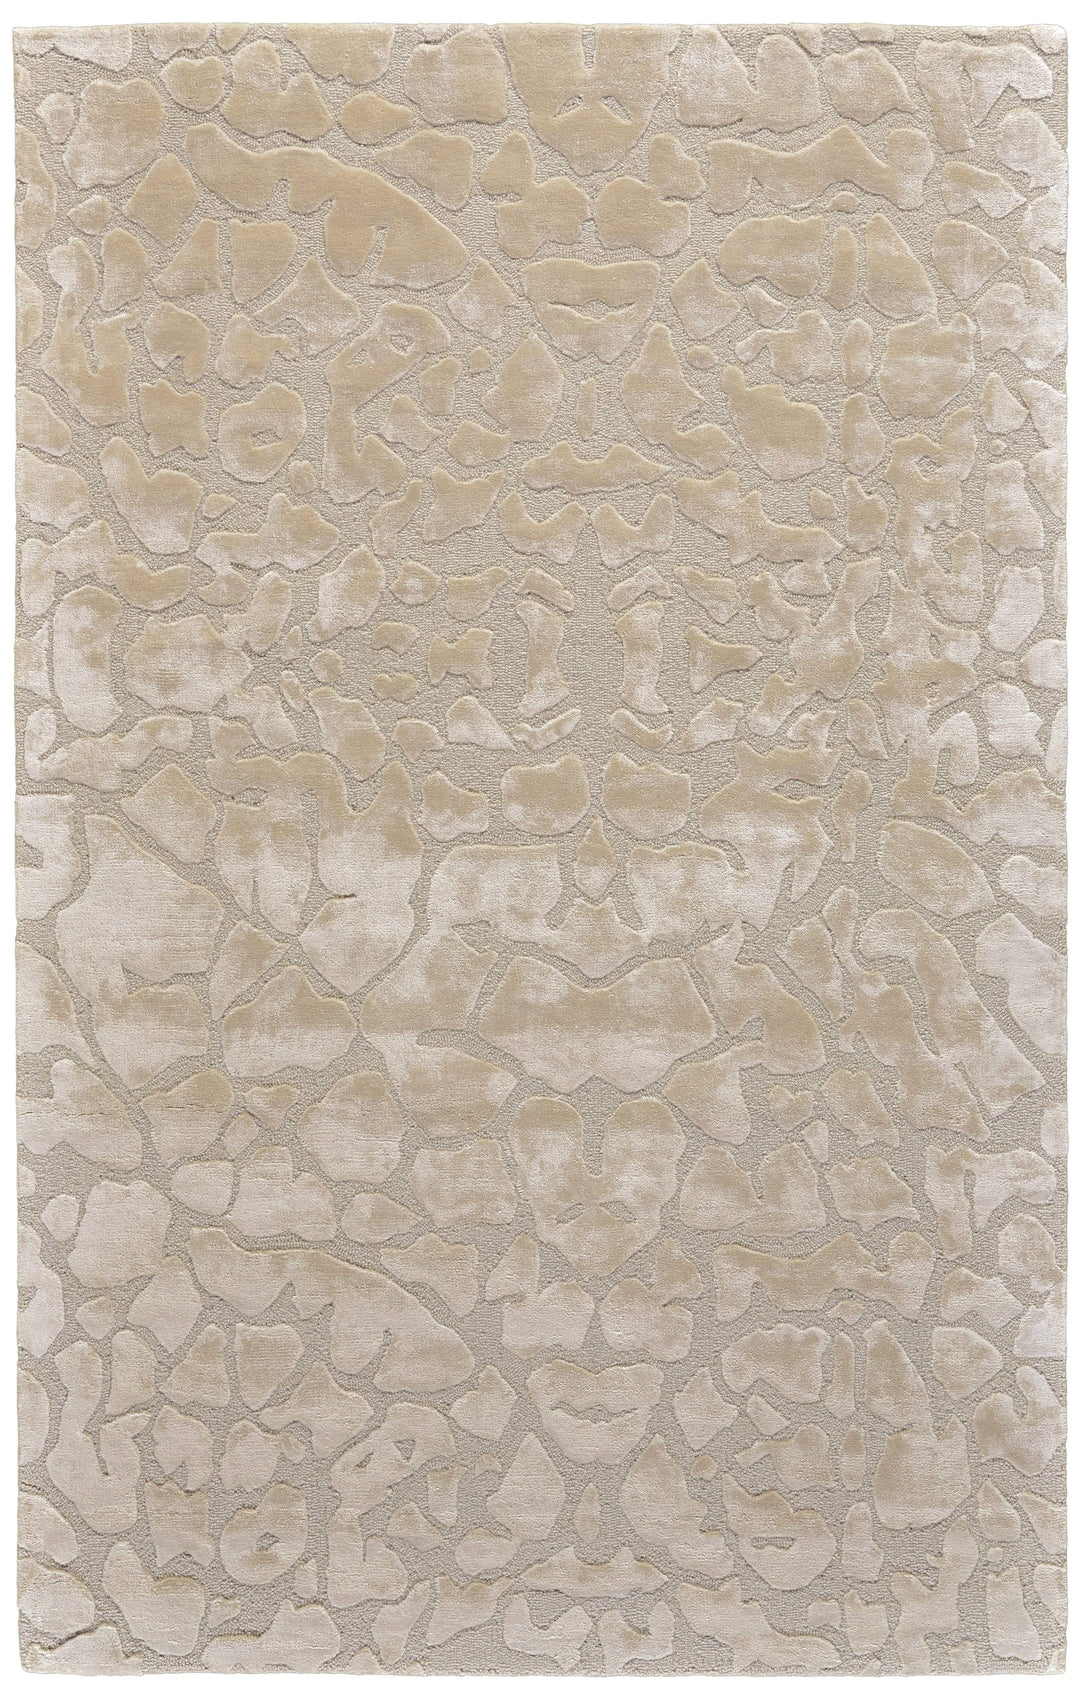 Feizy Feizy Mali Lustrous Tufted Abstract Rug - Available in 6 Sizes - Ivory Cream 3'-6" x 5'-6" 7178629FIVY000C50